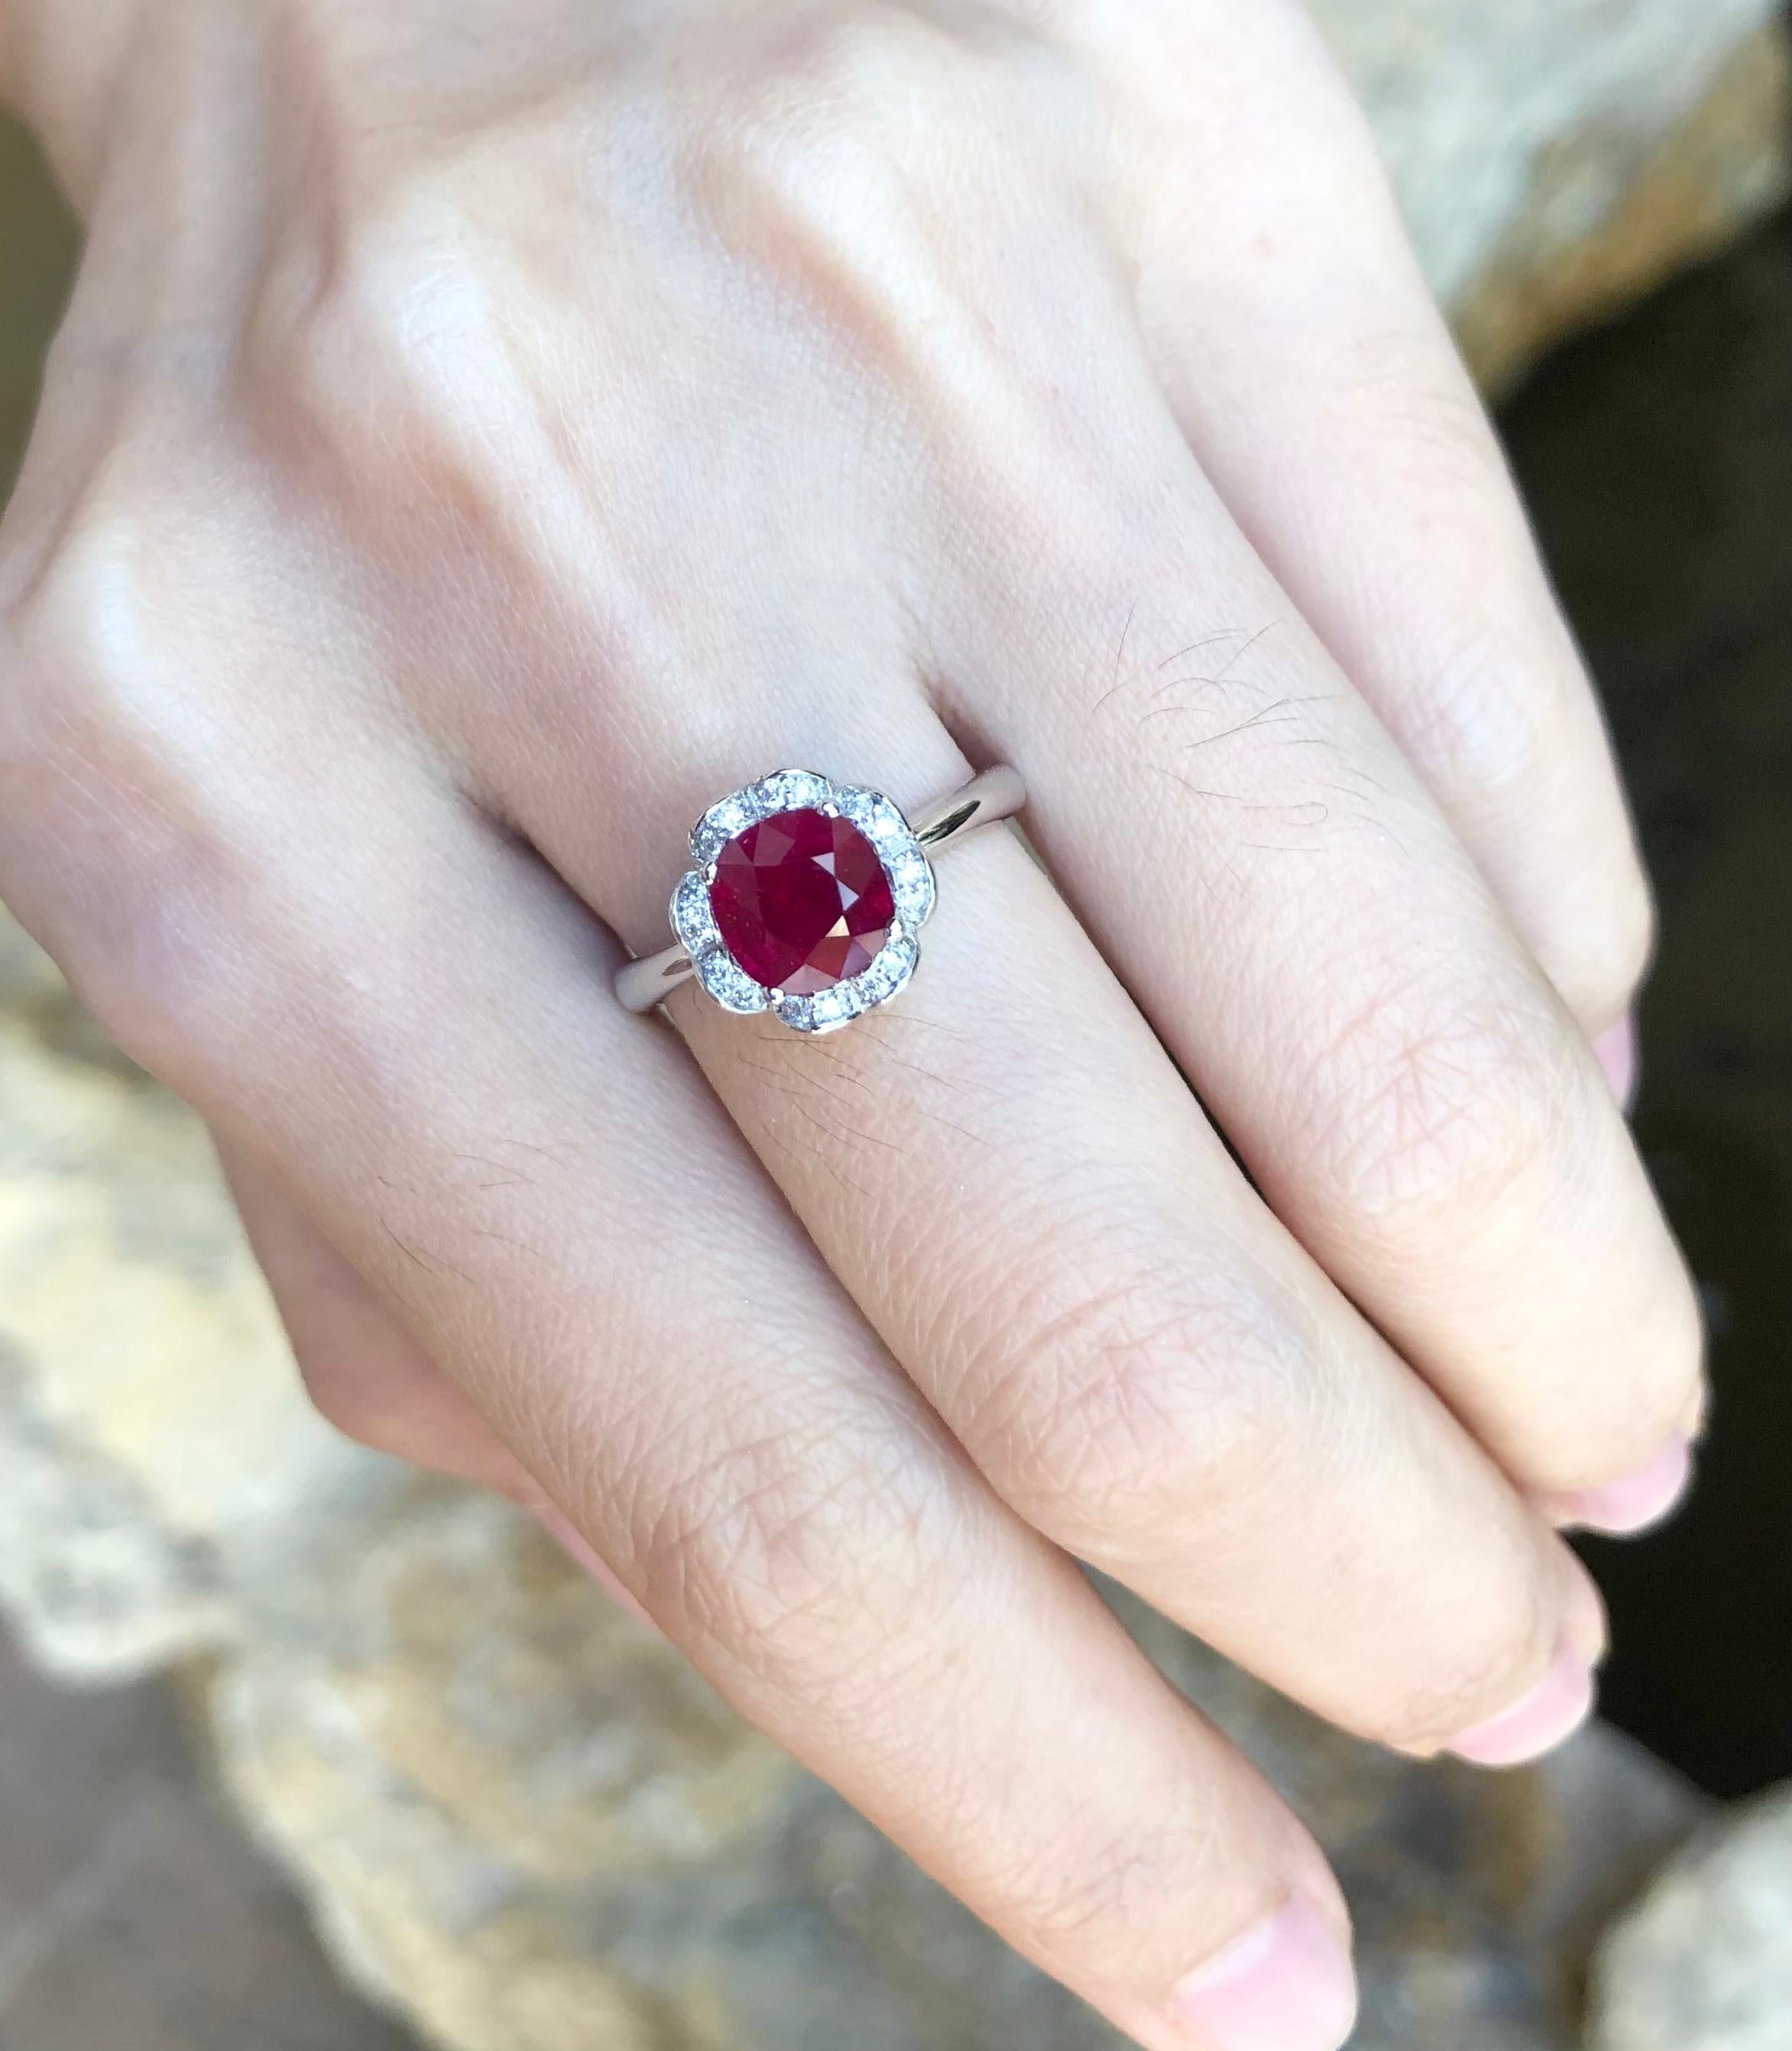 Ruby 2.01 carats with Diamond 0.09 carat Ring set in 18 Karat White Gold Settings

Width:  1.0 cm 
Length:  1.0 cm
Ring Size: 51
Total Weight: 4.45 grams

